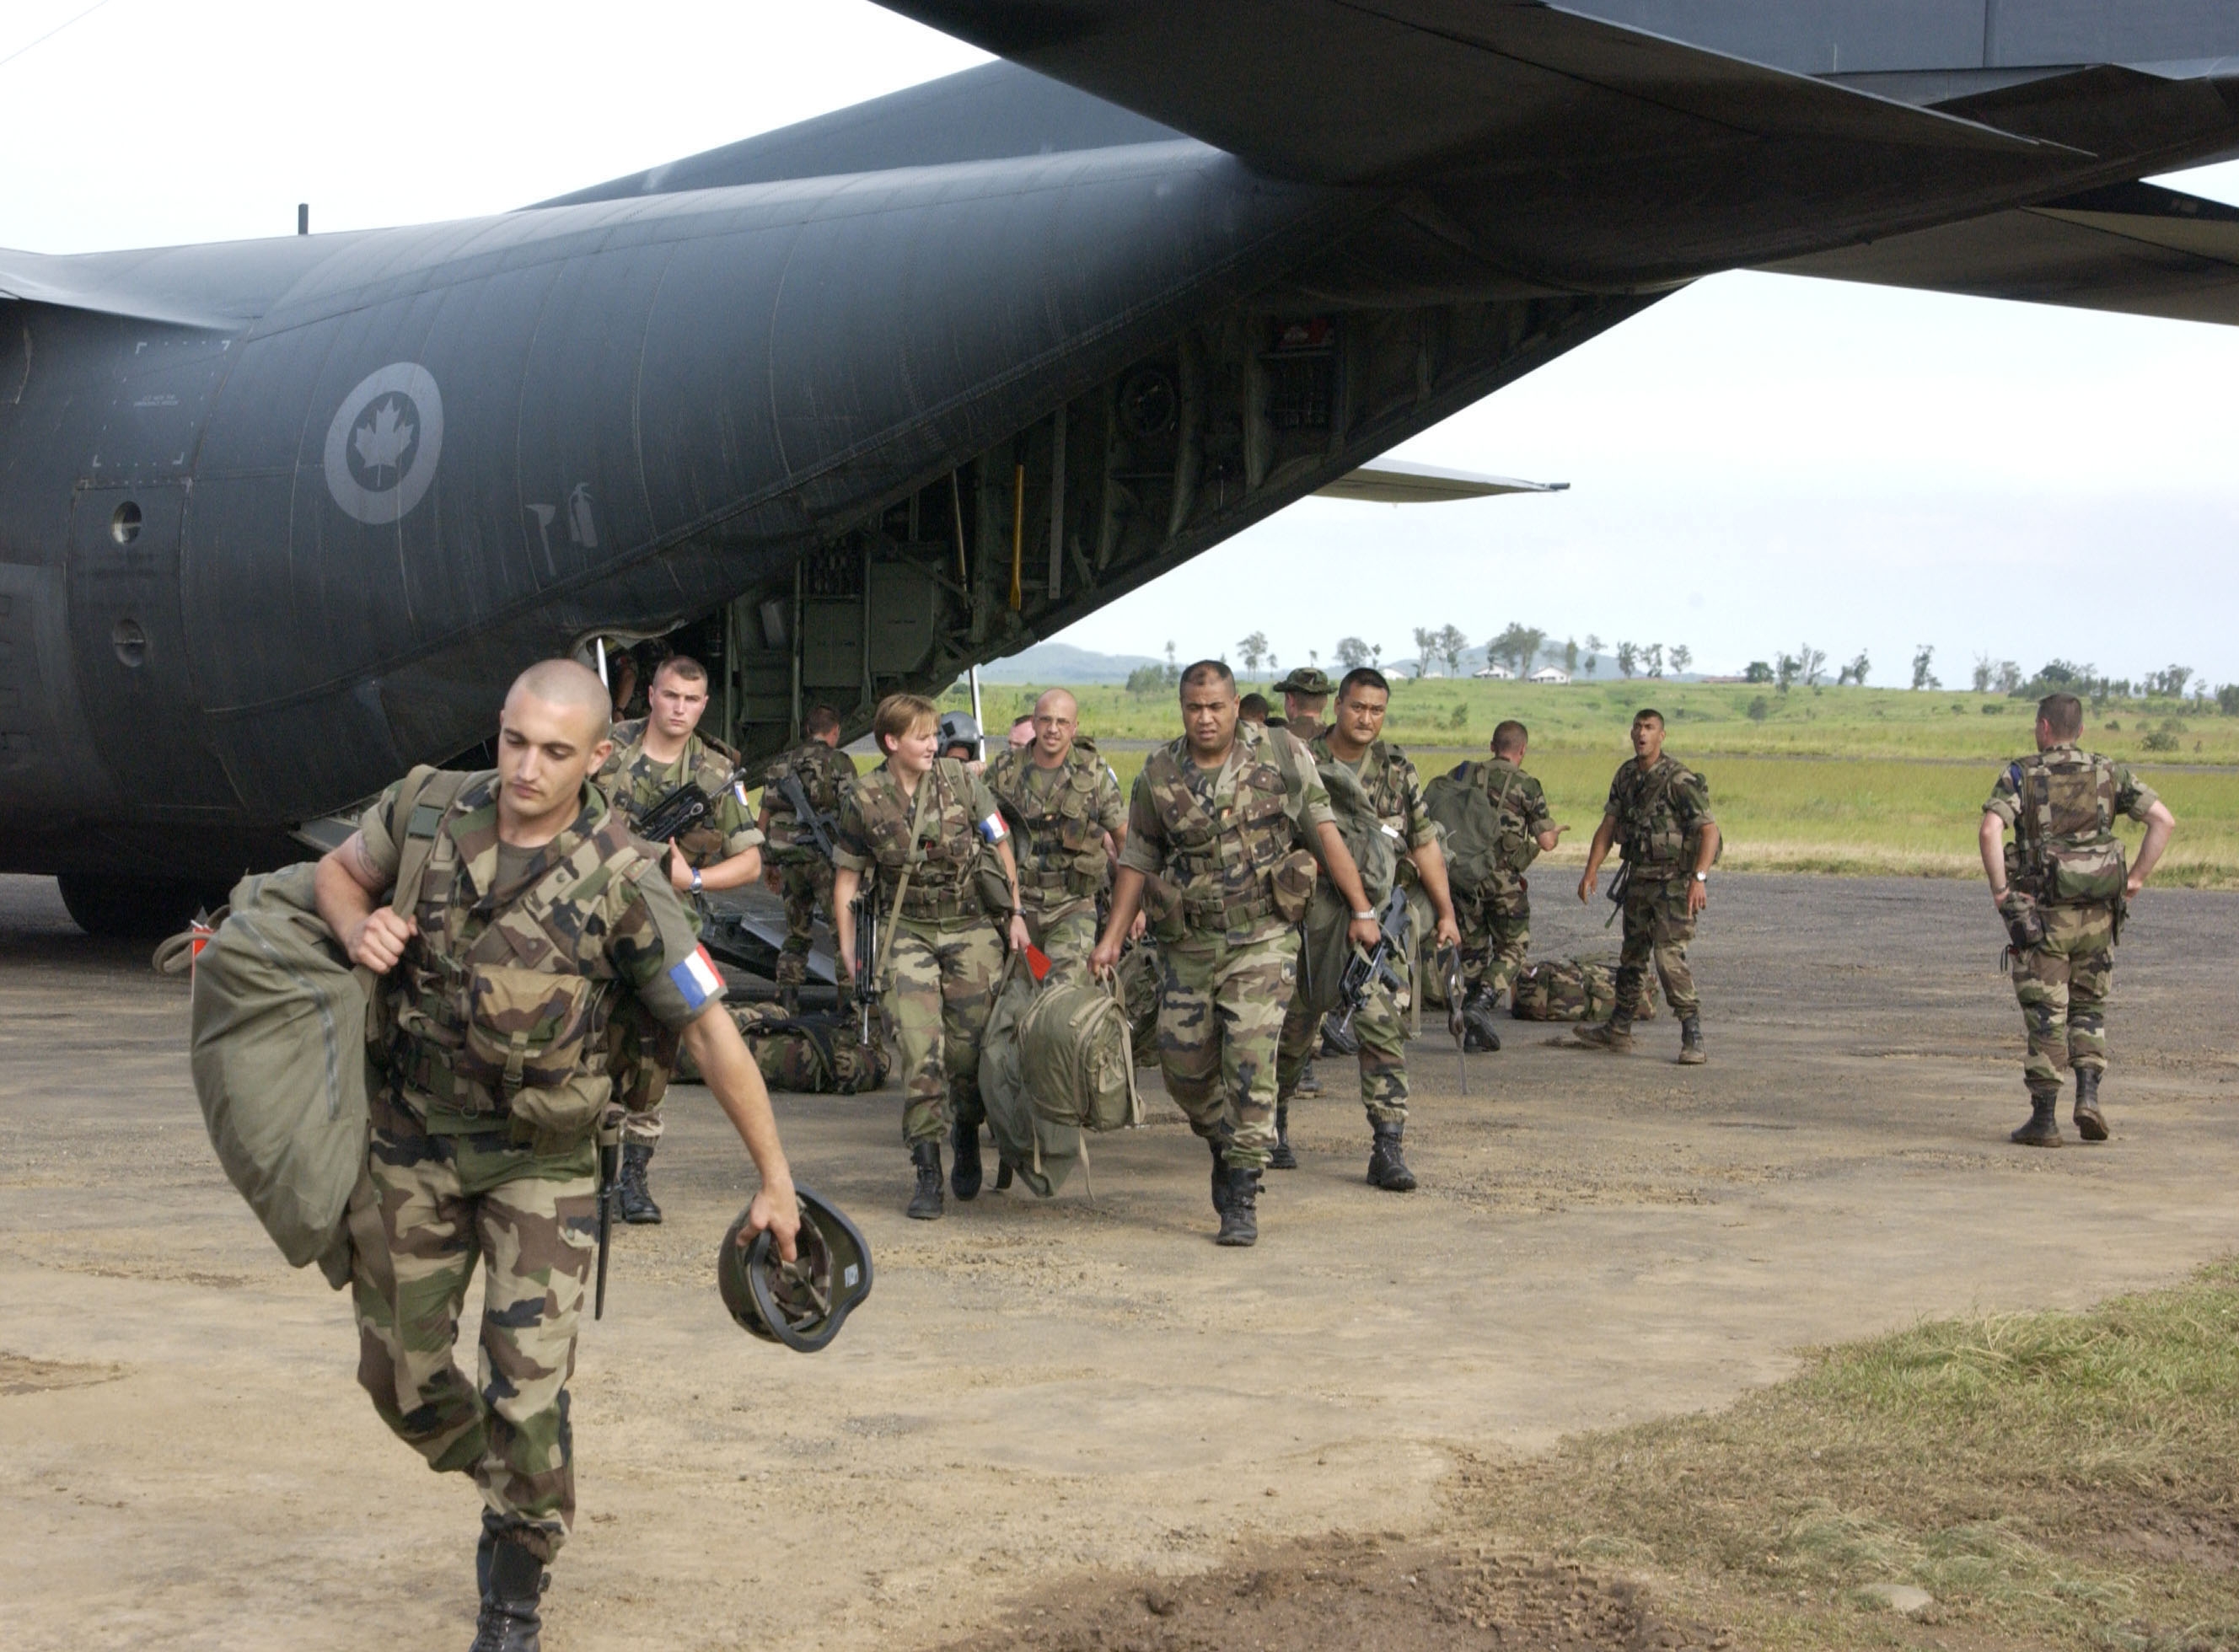 French soldiers disembark a Canadian CC-130 Hercules transport aircraft in Bunia, Democratic Republic of Congo, on June 11, 2003. The Canadian Forces supplied two CC-130 aircraft as part of Operation Caravan to help deploy the French-led coalition of approximately 1,400 troops into the war-torn country. PHOTO: Master Corporal Brian Walsh, IS2003-0327 